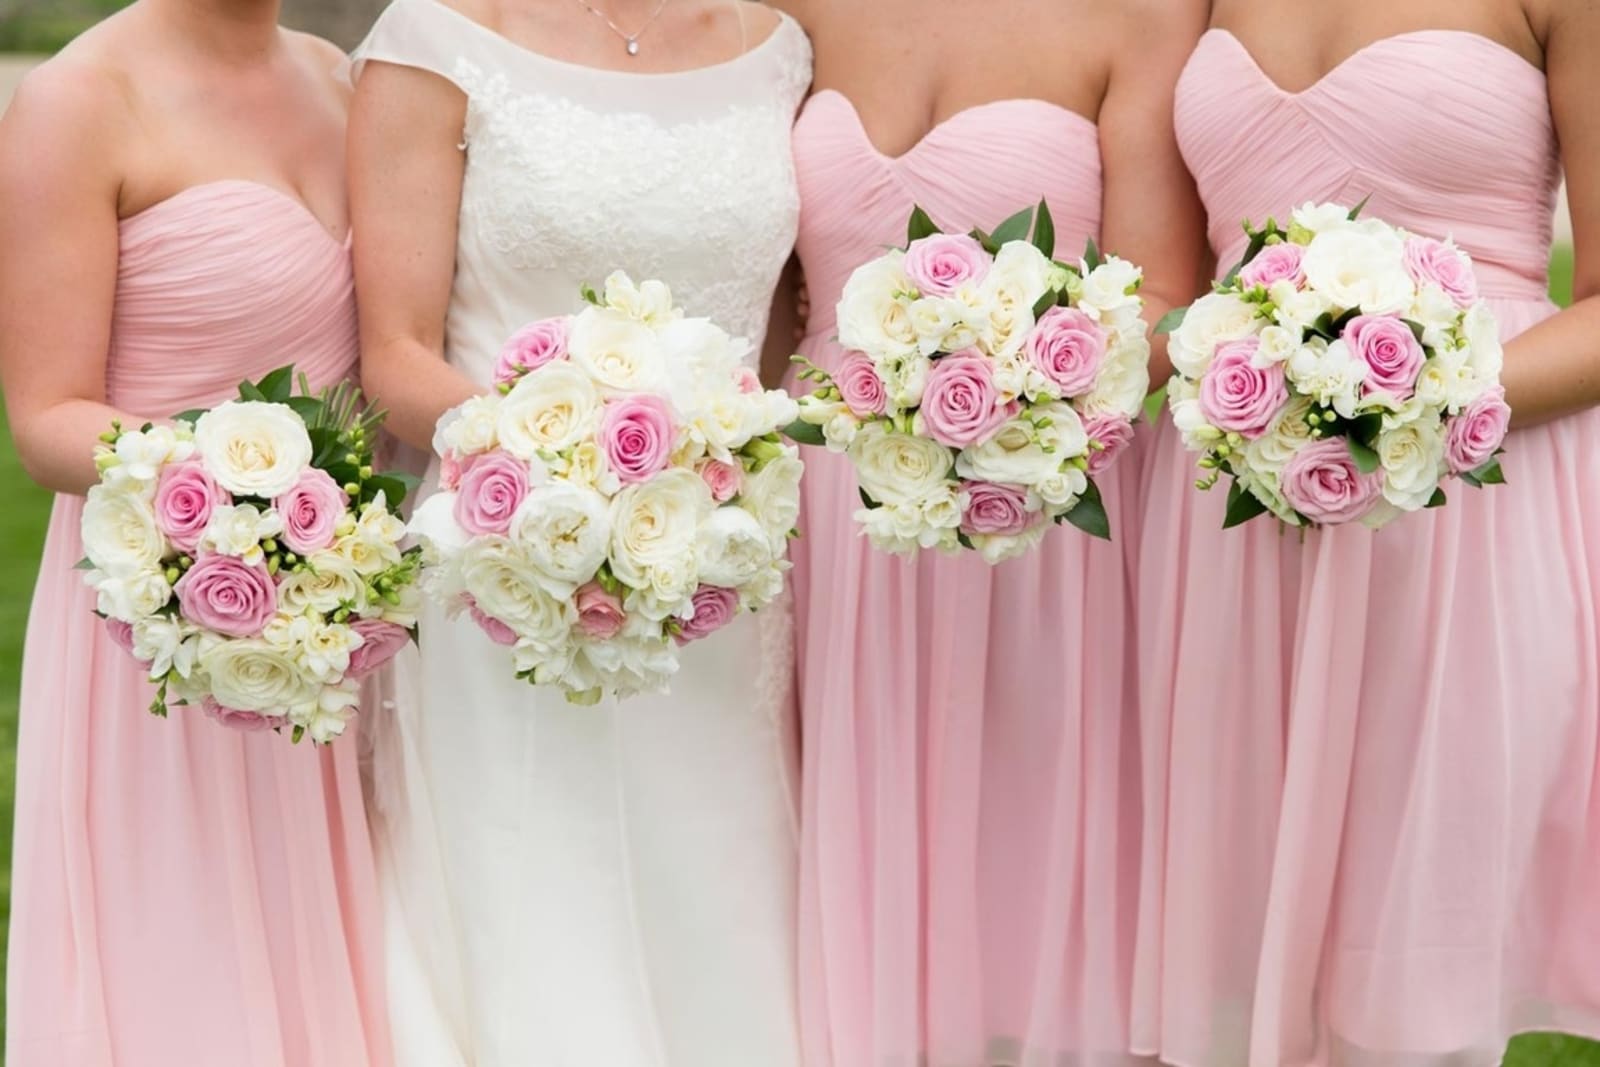 Bridebook.co.uk- bride and bridesmaids holding up white and pink bouquets